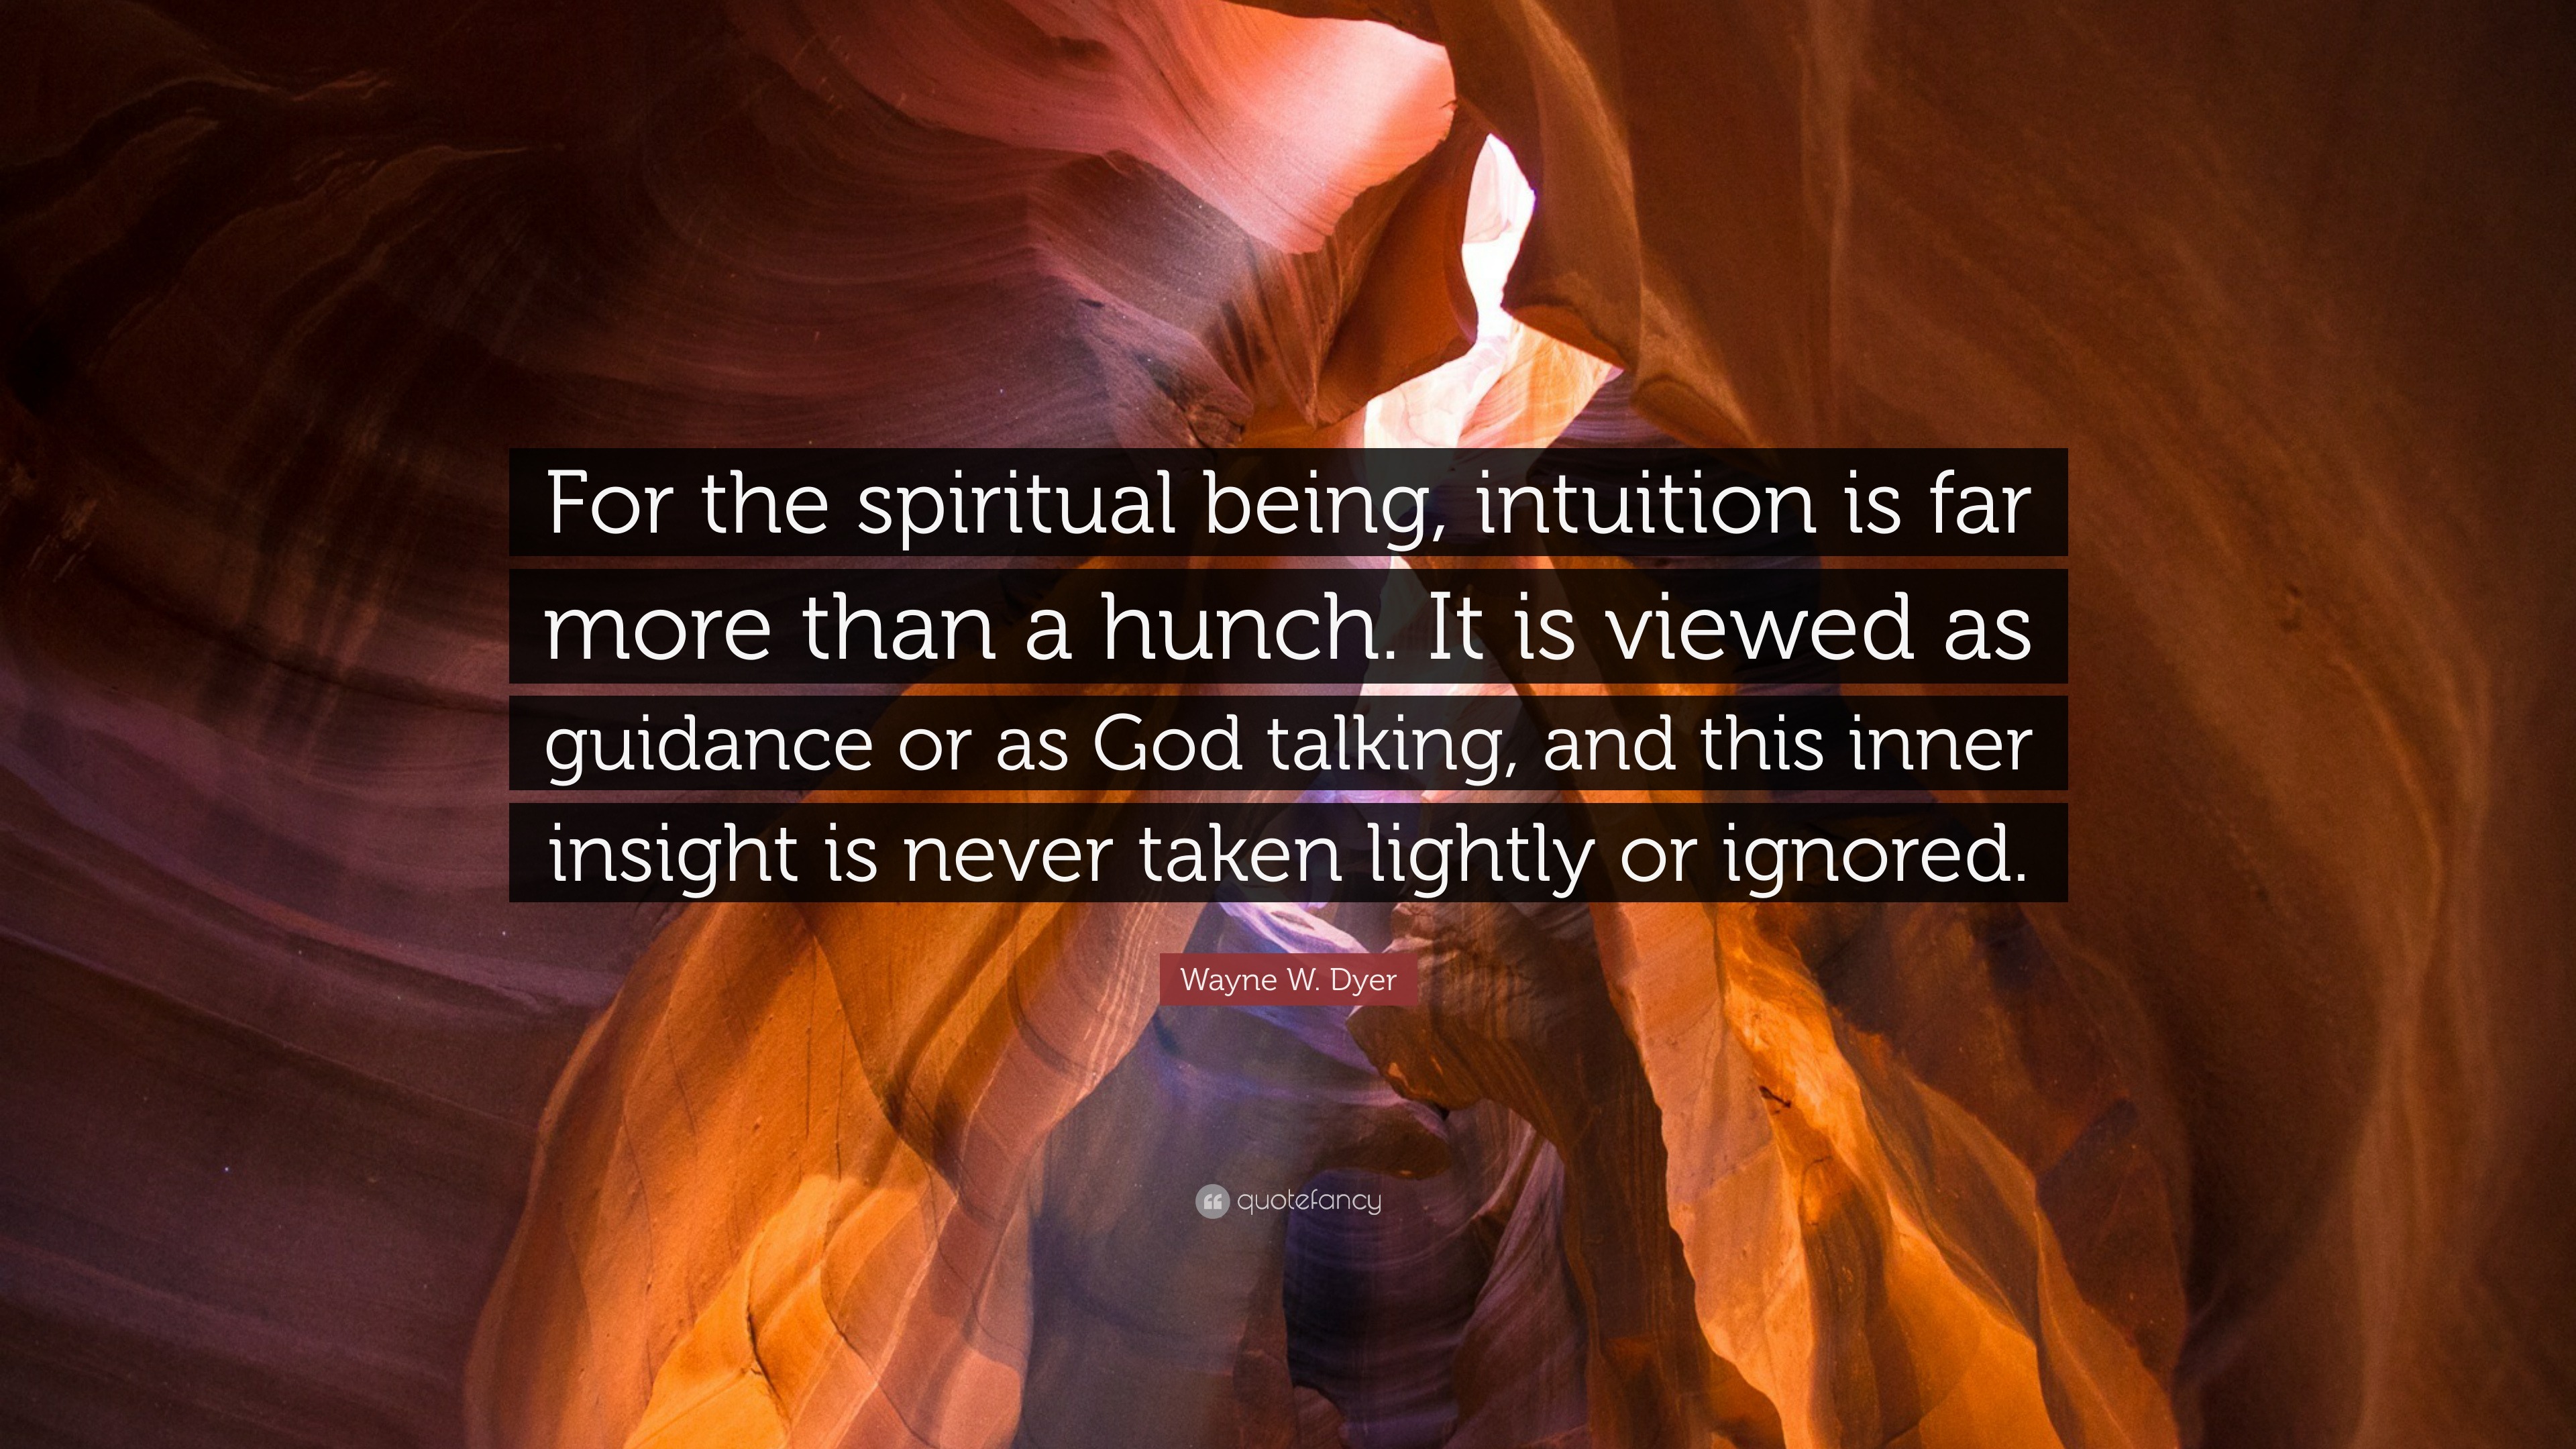 Wayne W. Dyer Quote: “For the spiritual being, intuition is far more than a  hunch. It is viewed as guidance or as God talking, and this inner ”